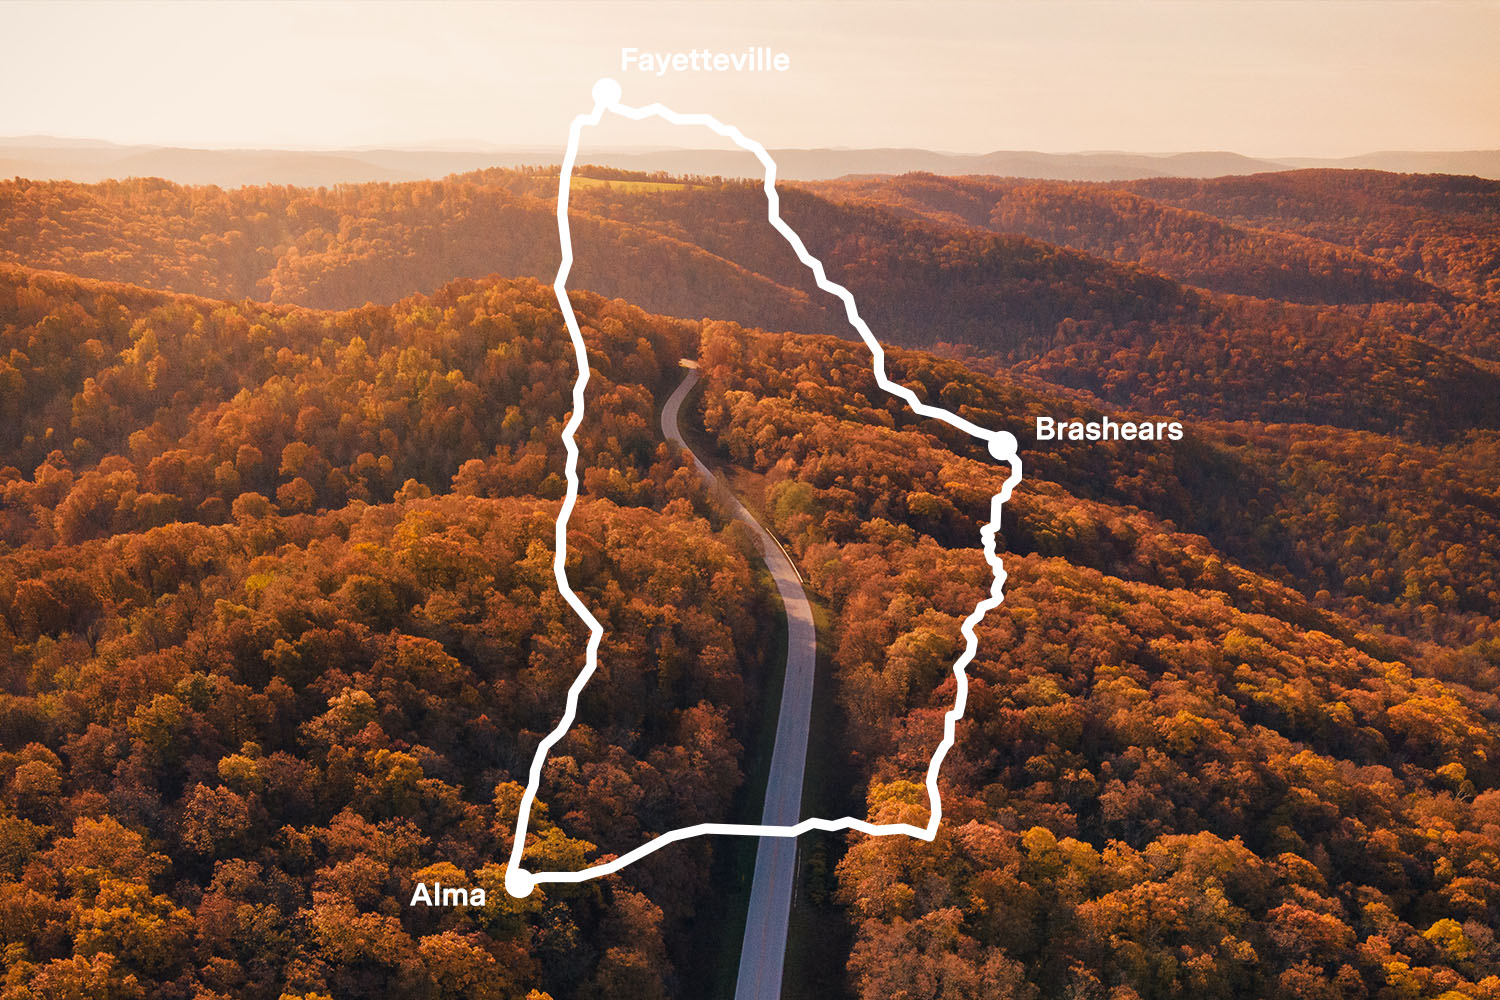 The Best Scenic Drive in the South is AR 23, The Pig's Tail